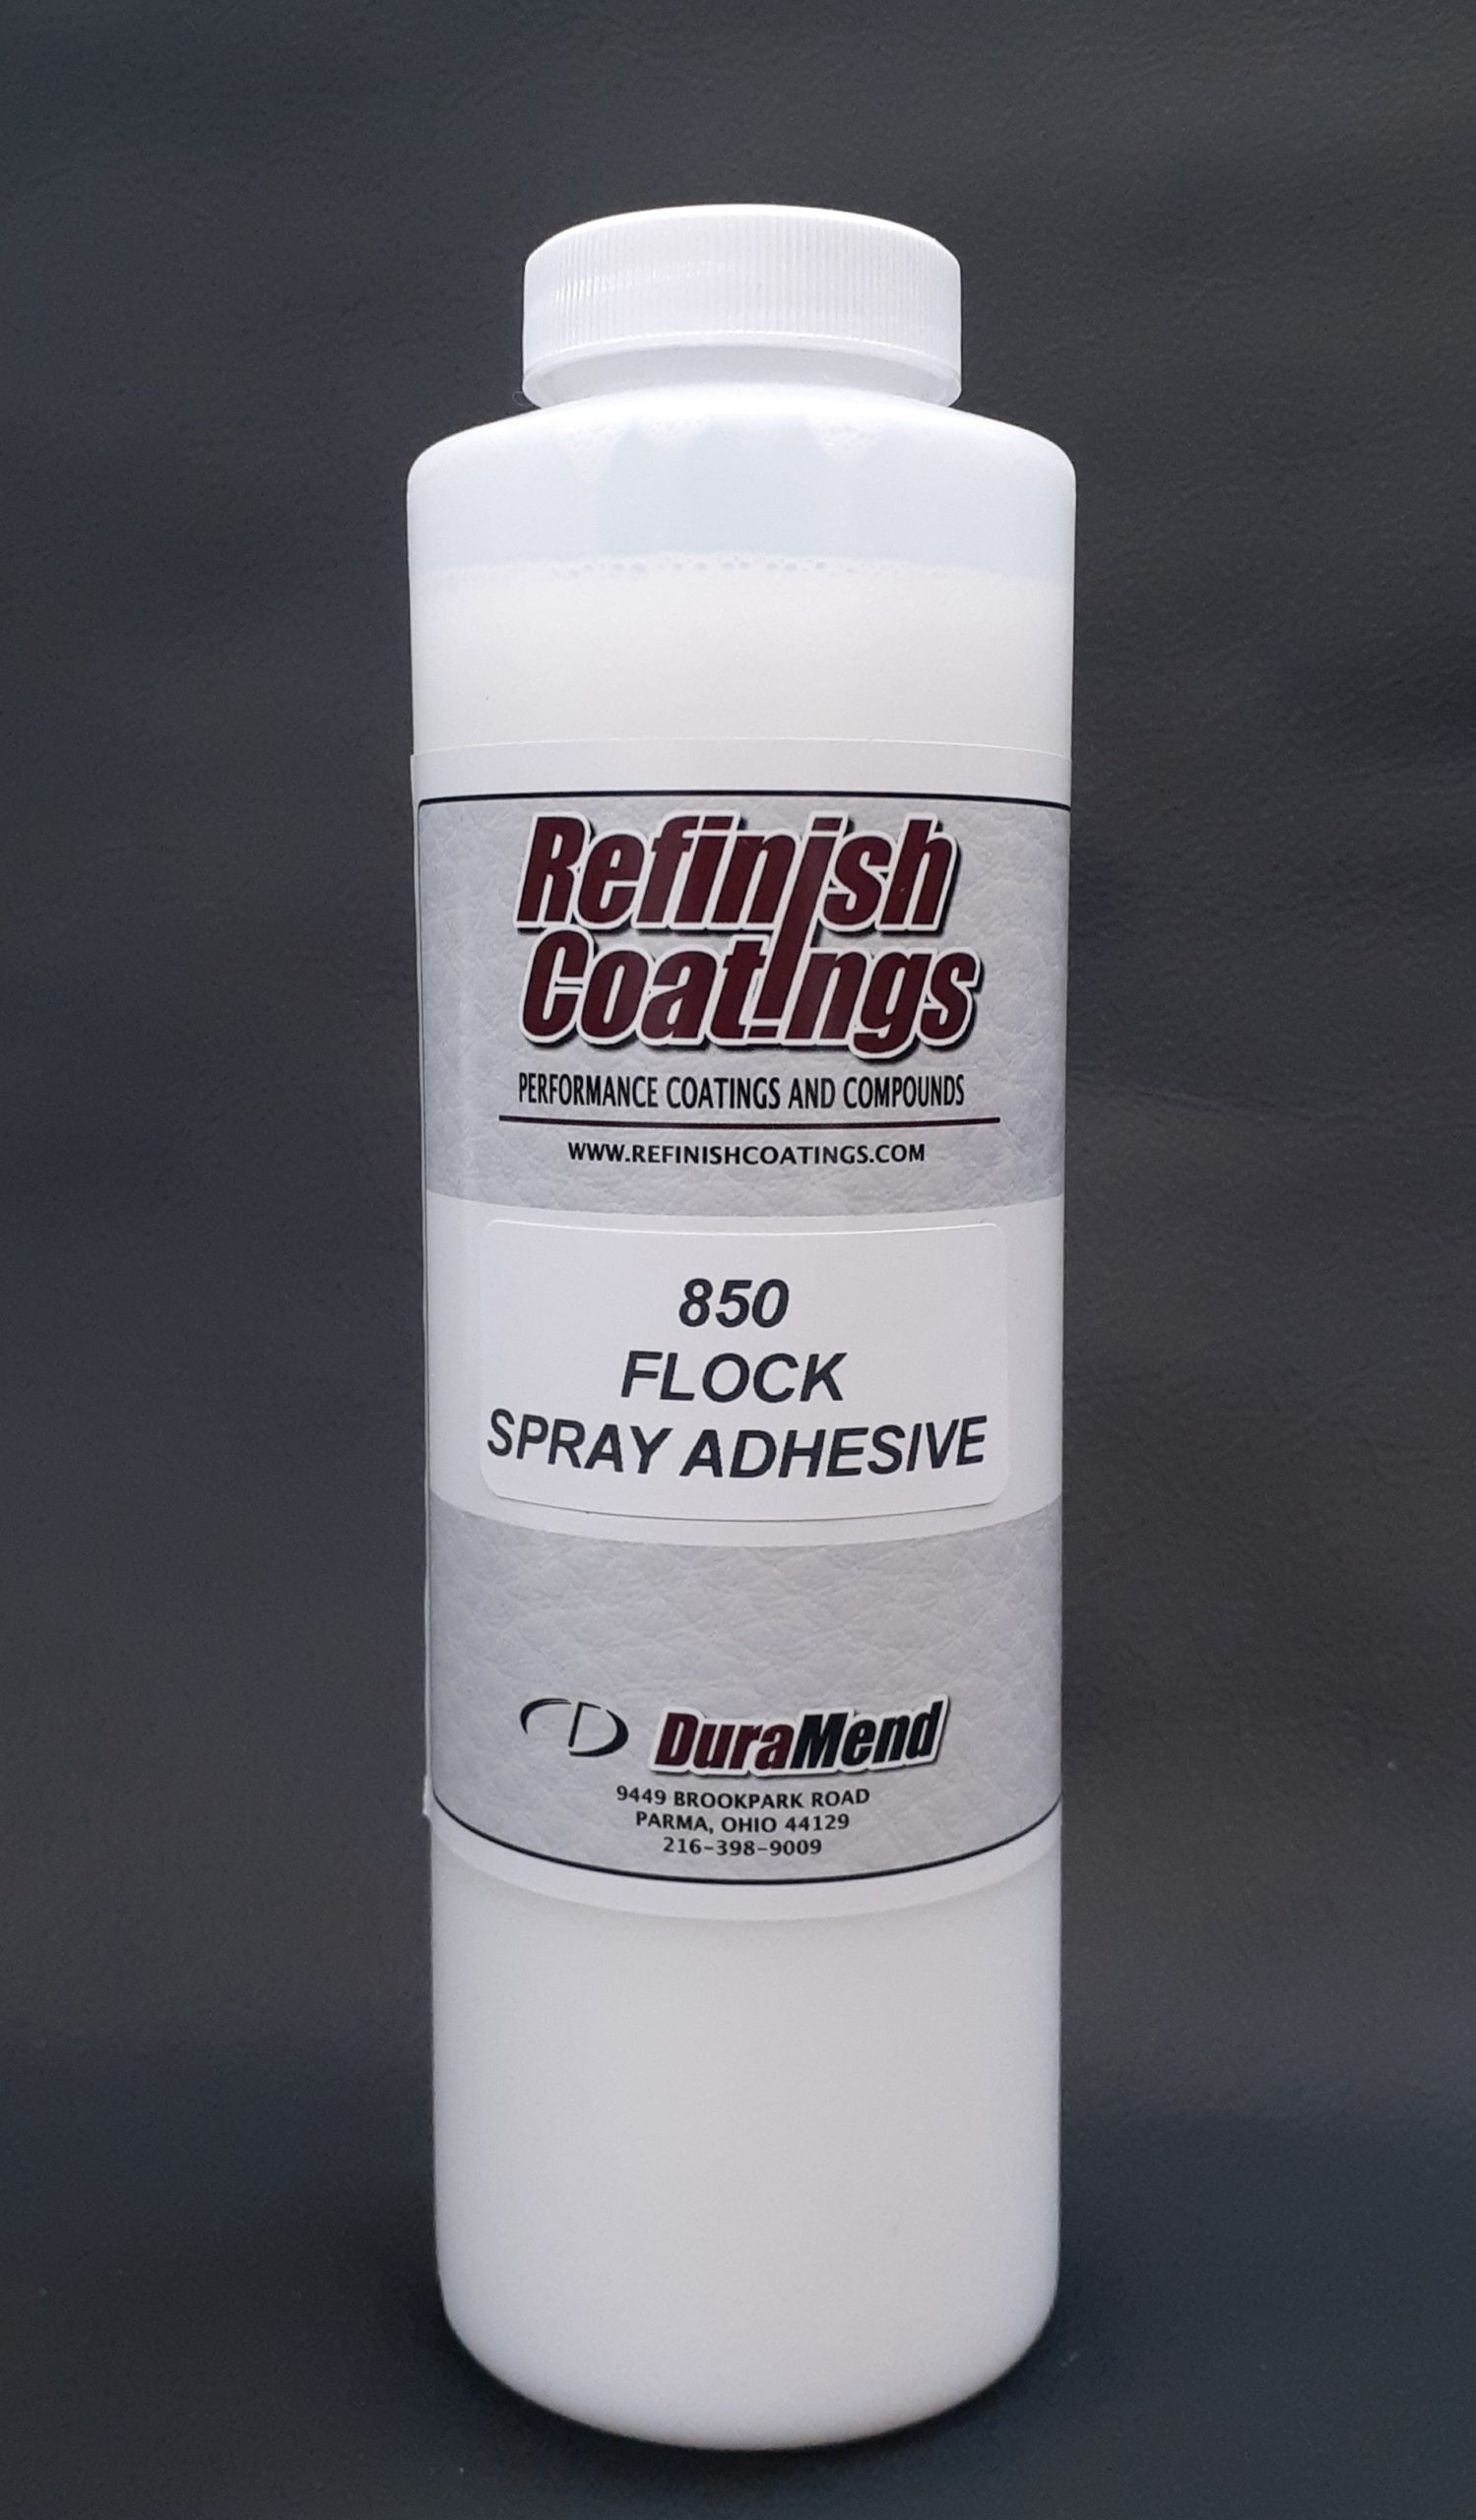 Flock Spray Adhesive - PERFORMANCE COATINGS AND COMPOUNDS